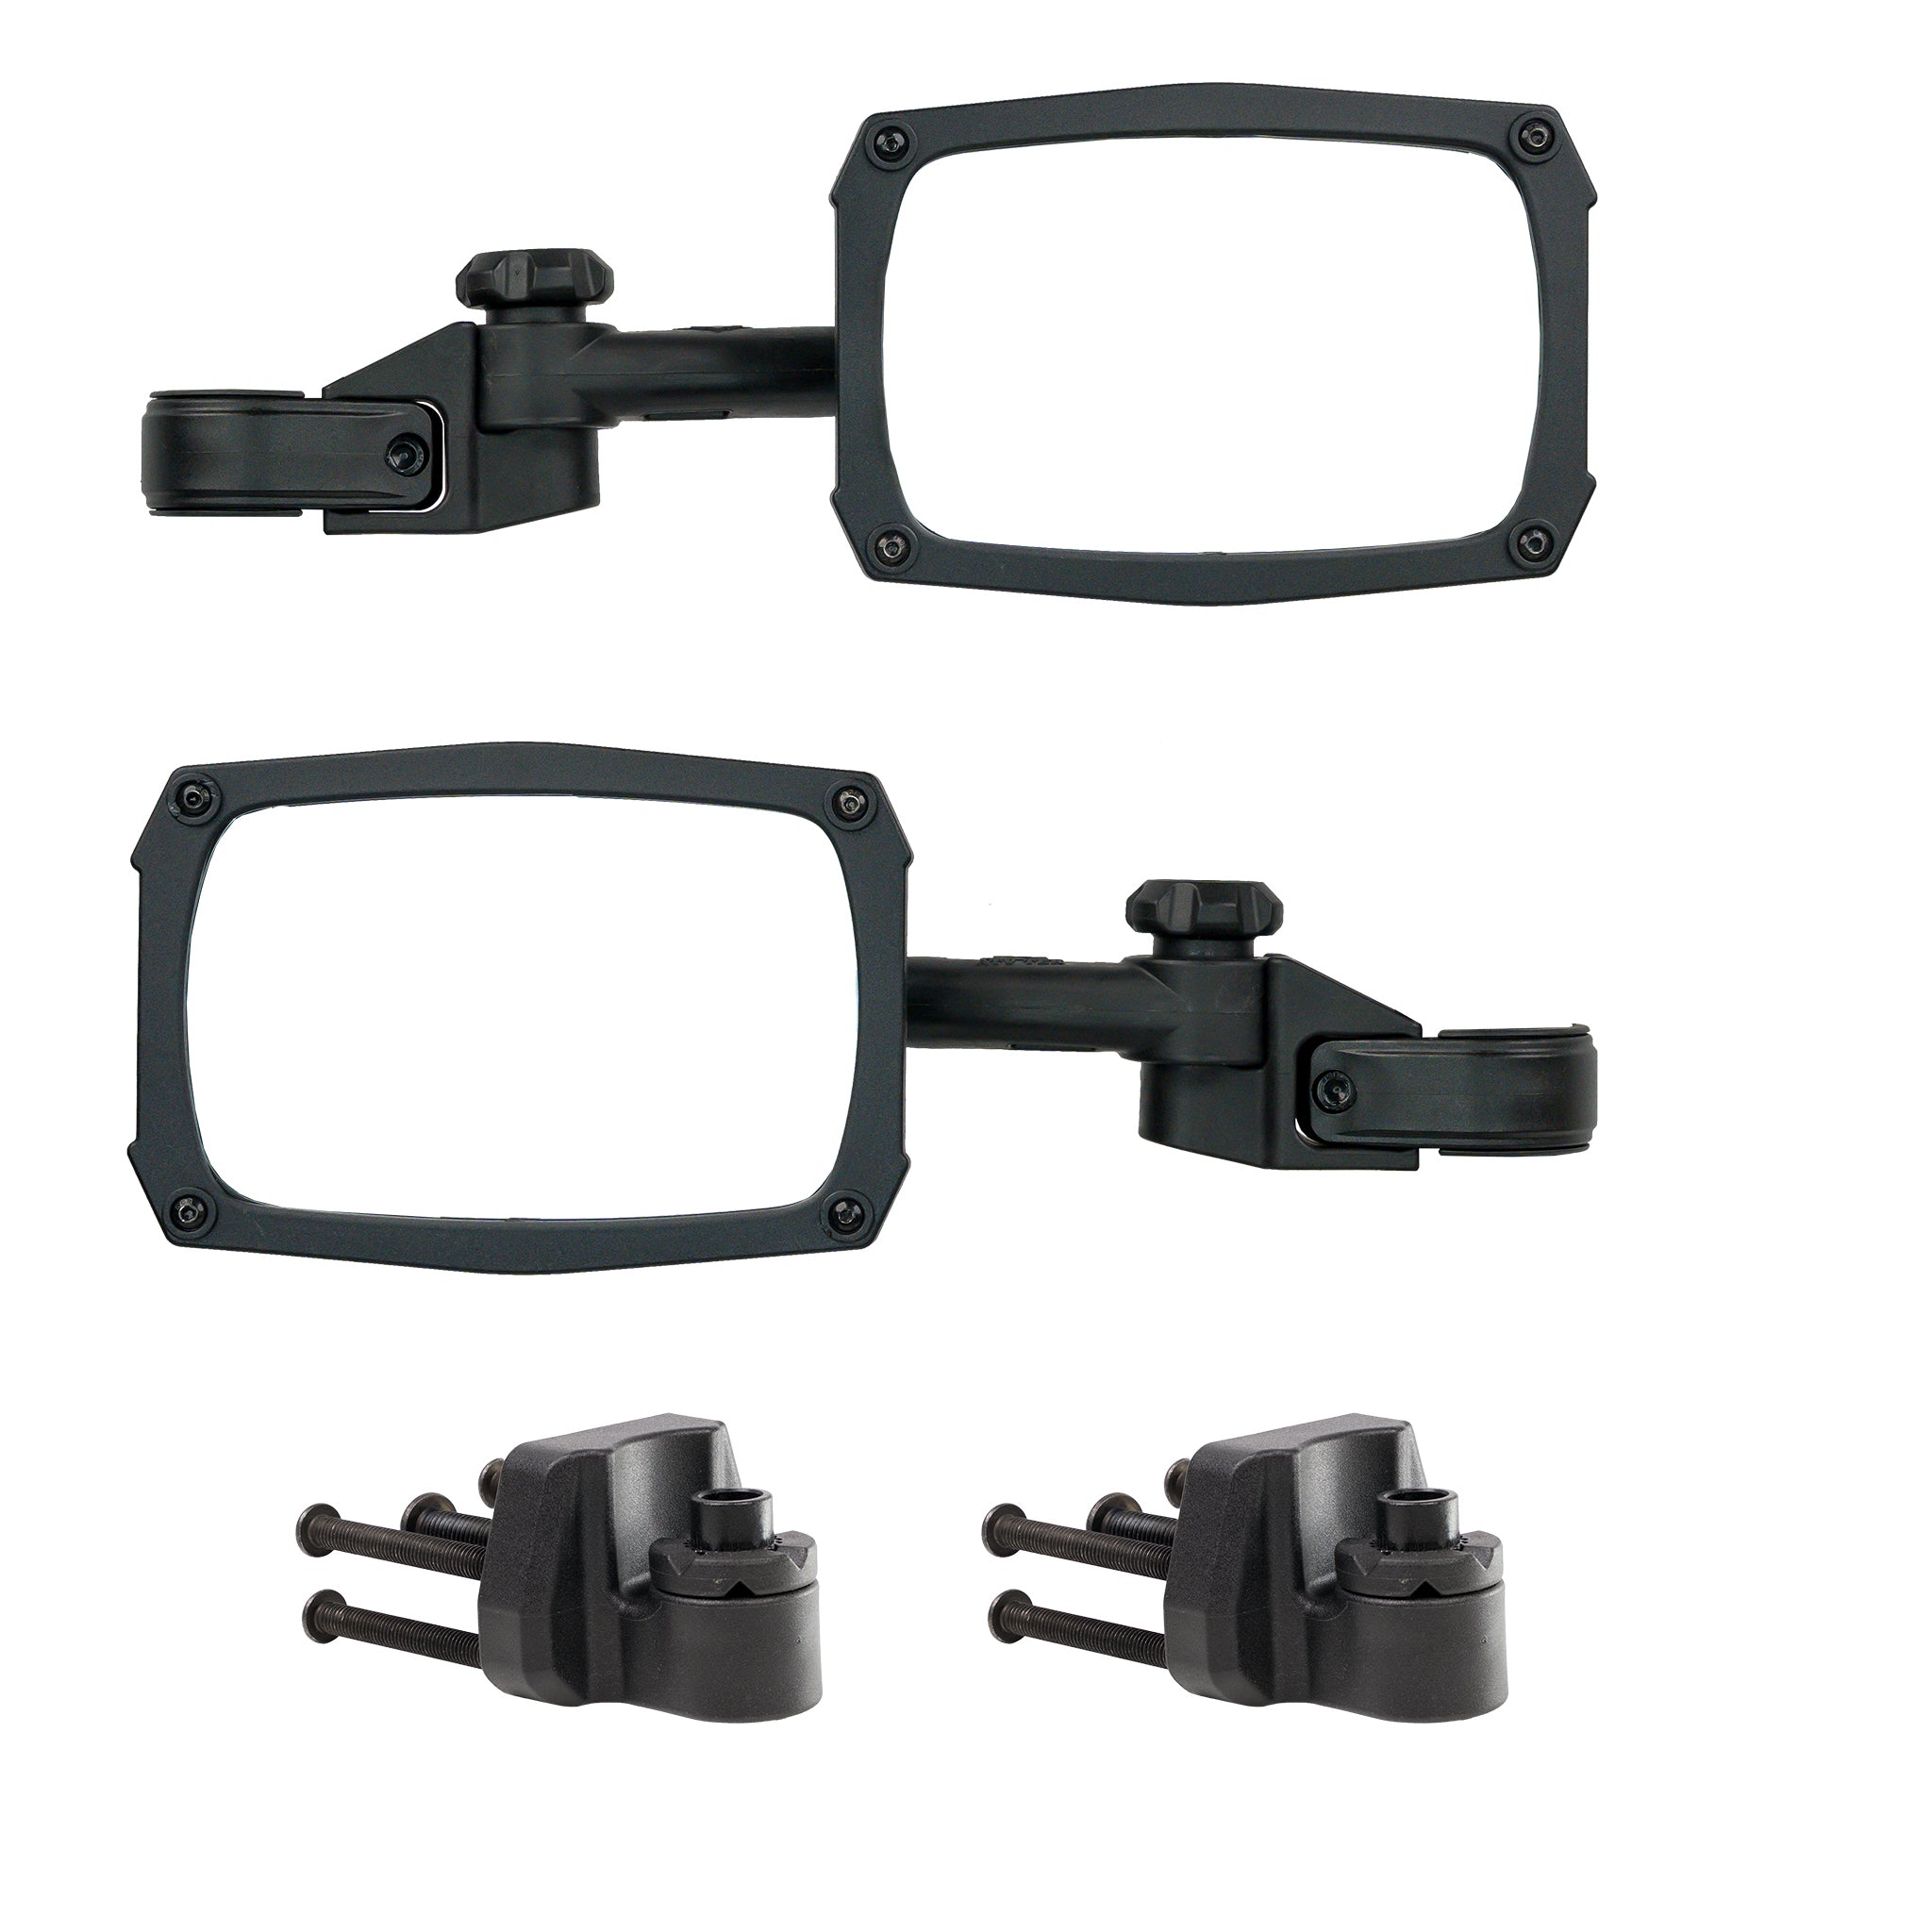 Clearview UTV Mirror with Anti Vibration and Breakaway, Black